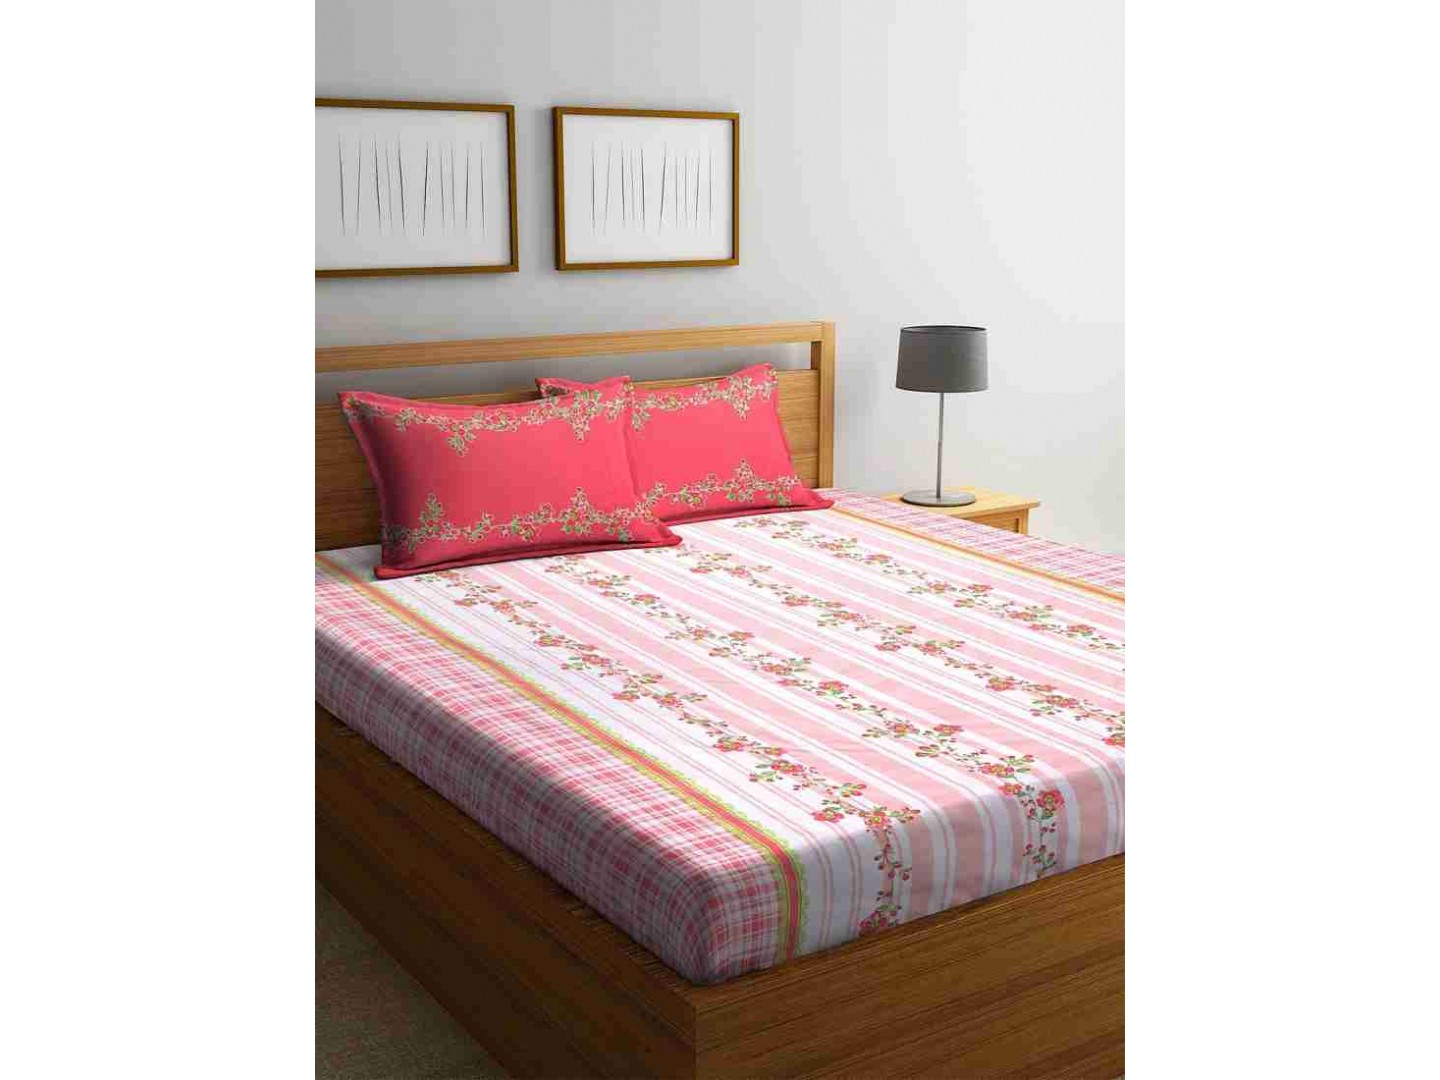 Bombay Dyeing bedspread